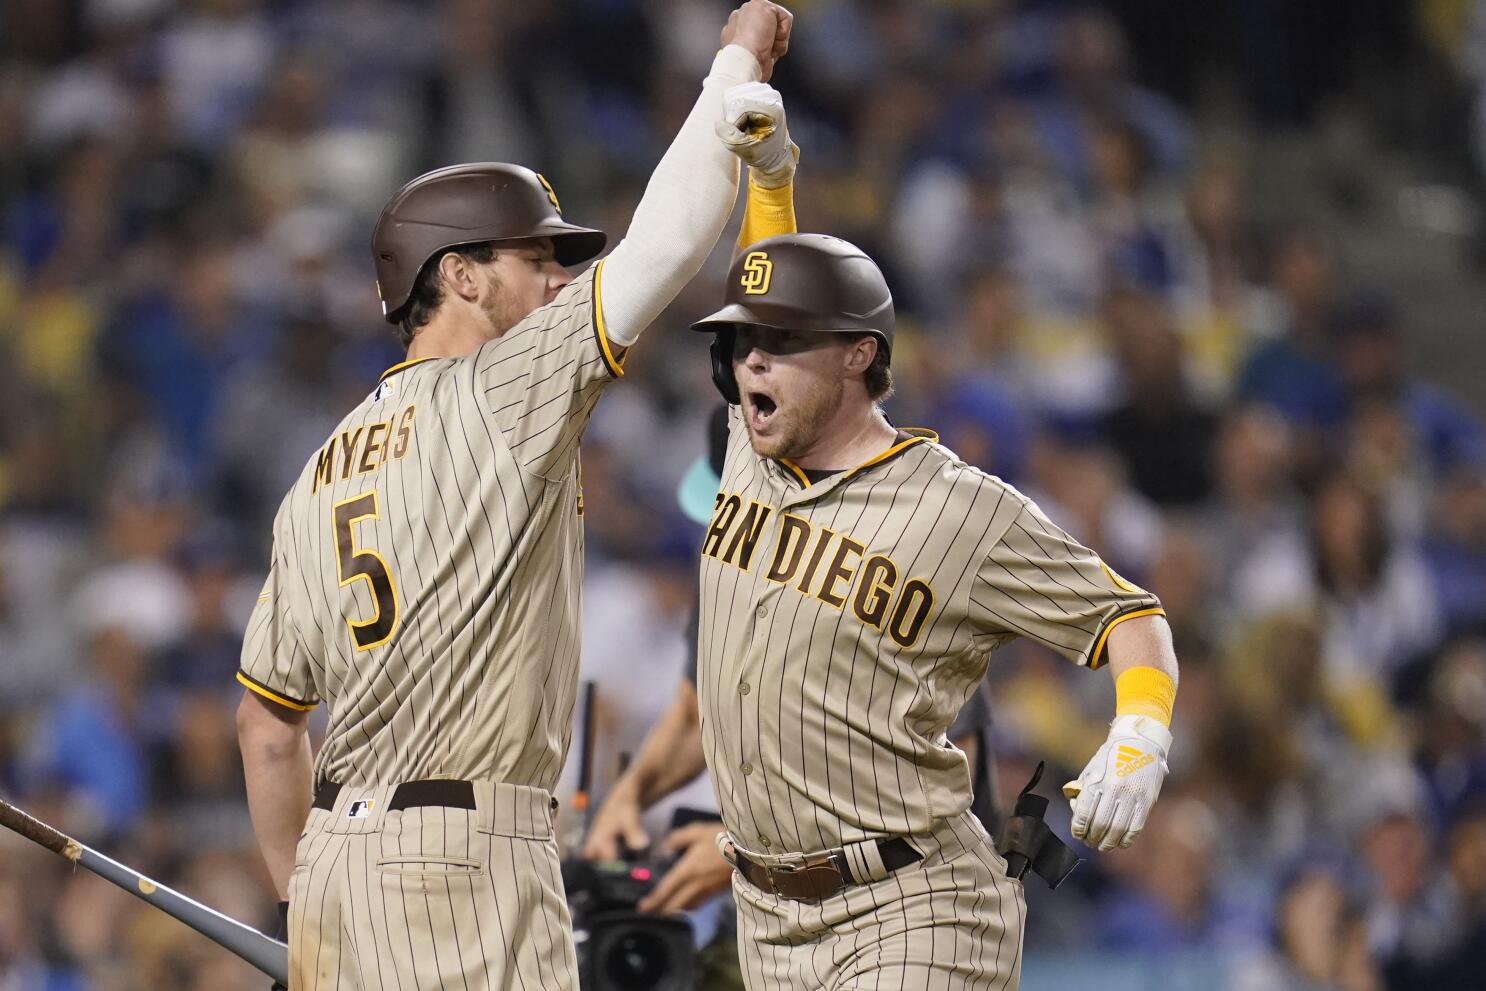 Padres win 3-2 in 10 to end 10-game losing streak to Dodgers